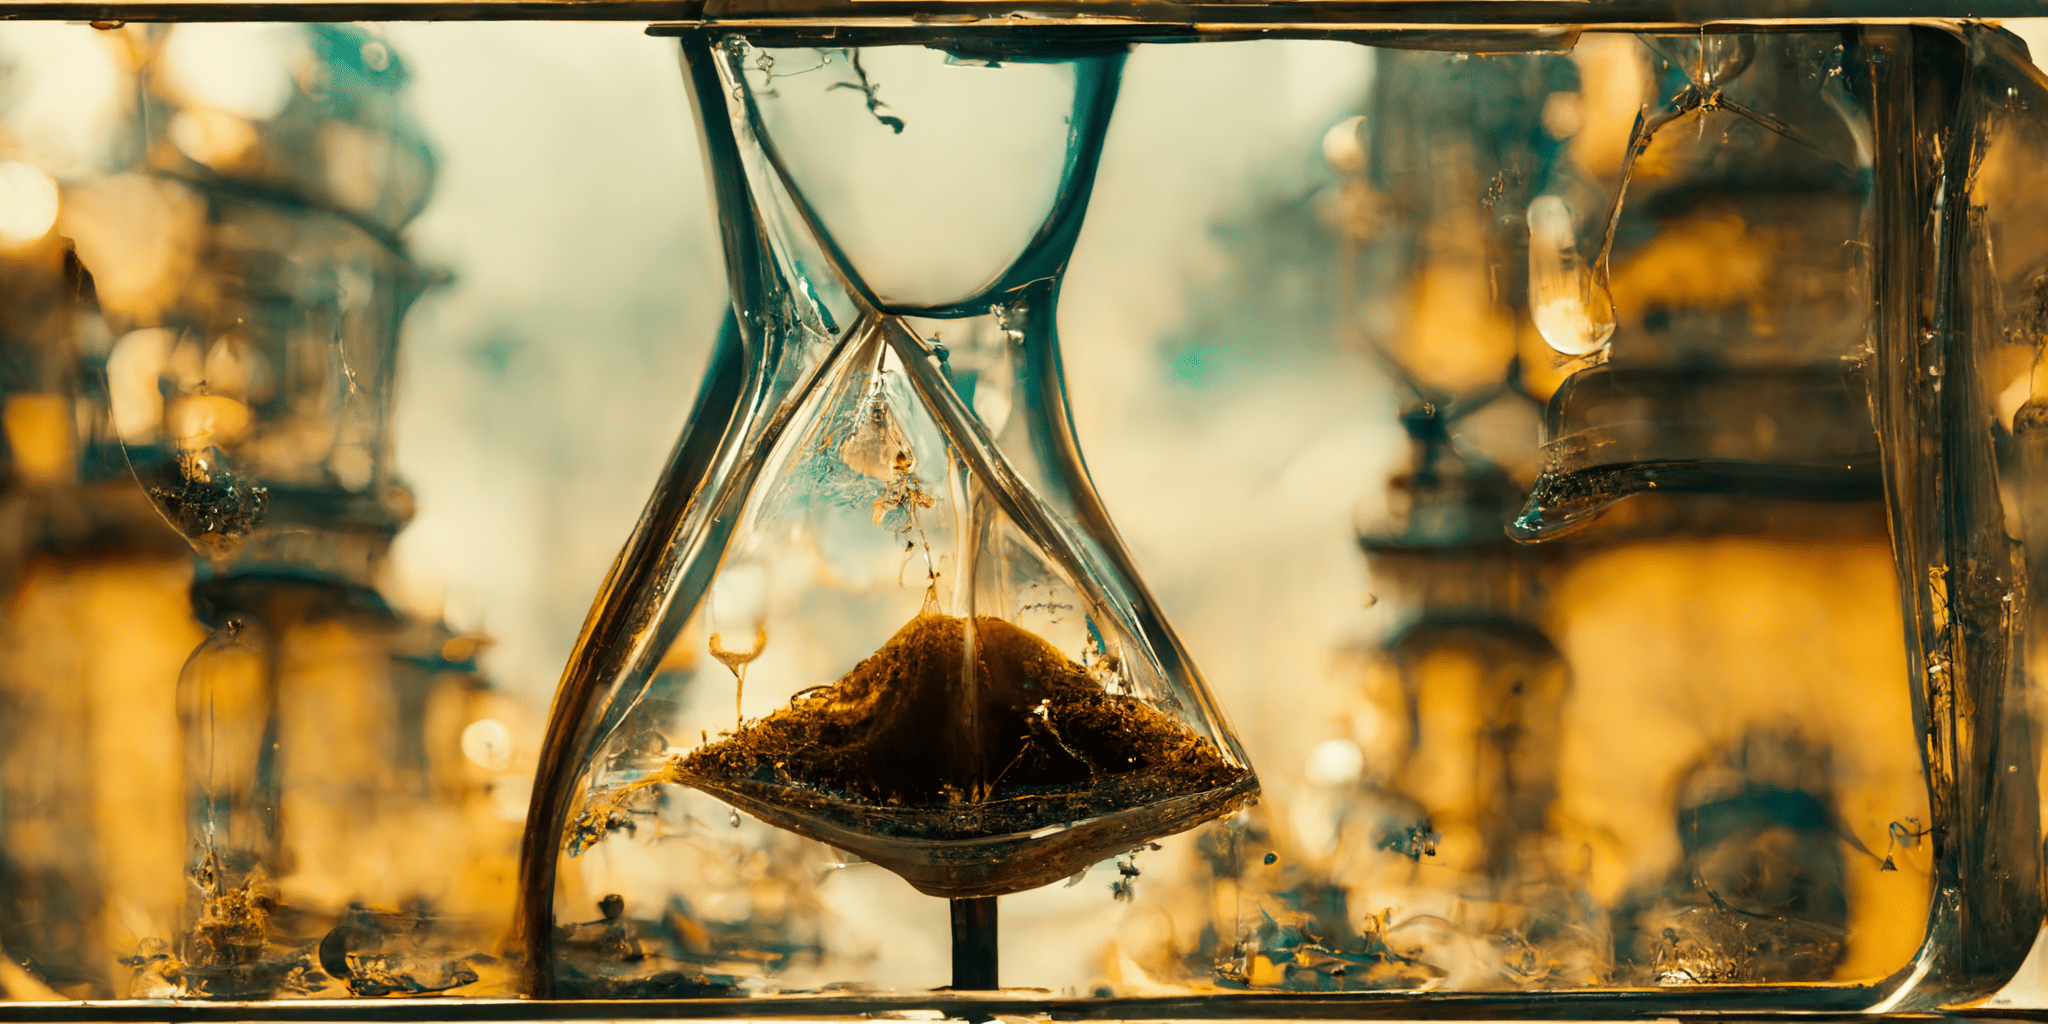 In an hourglass I cannot turn upside down – sand has nowhere to go